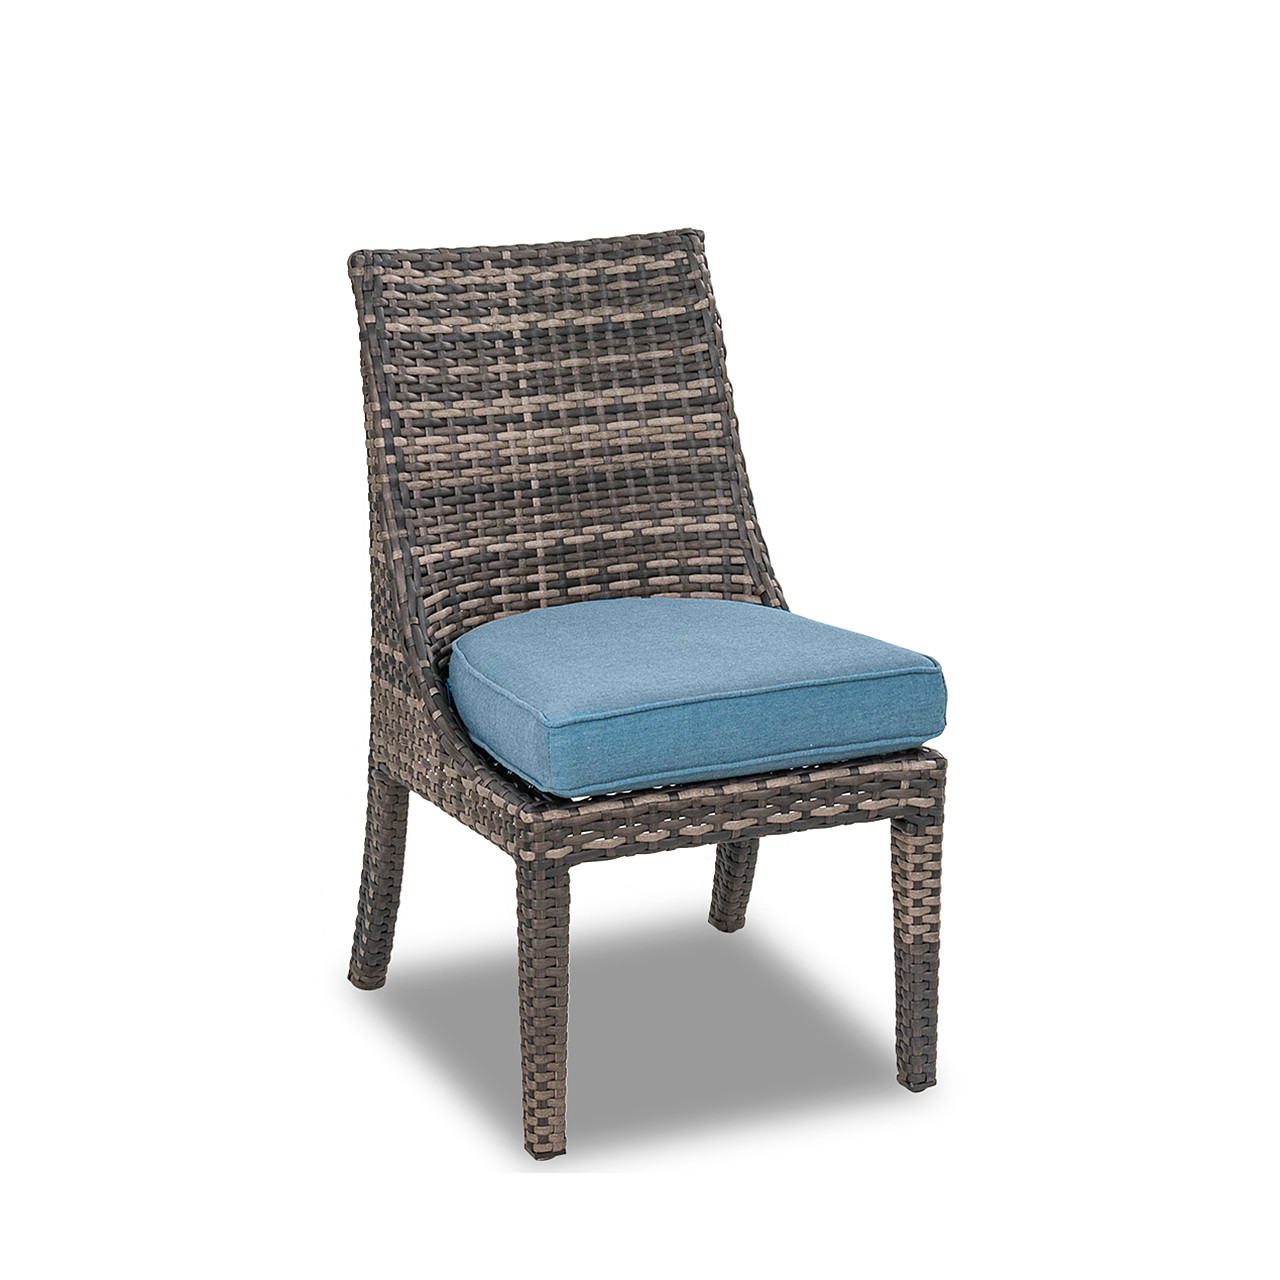 Tangiers Canola Seed Outdoor Wicker and Cast Lagoon Cushion Dining Side Chair